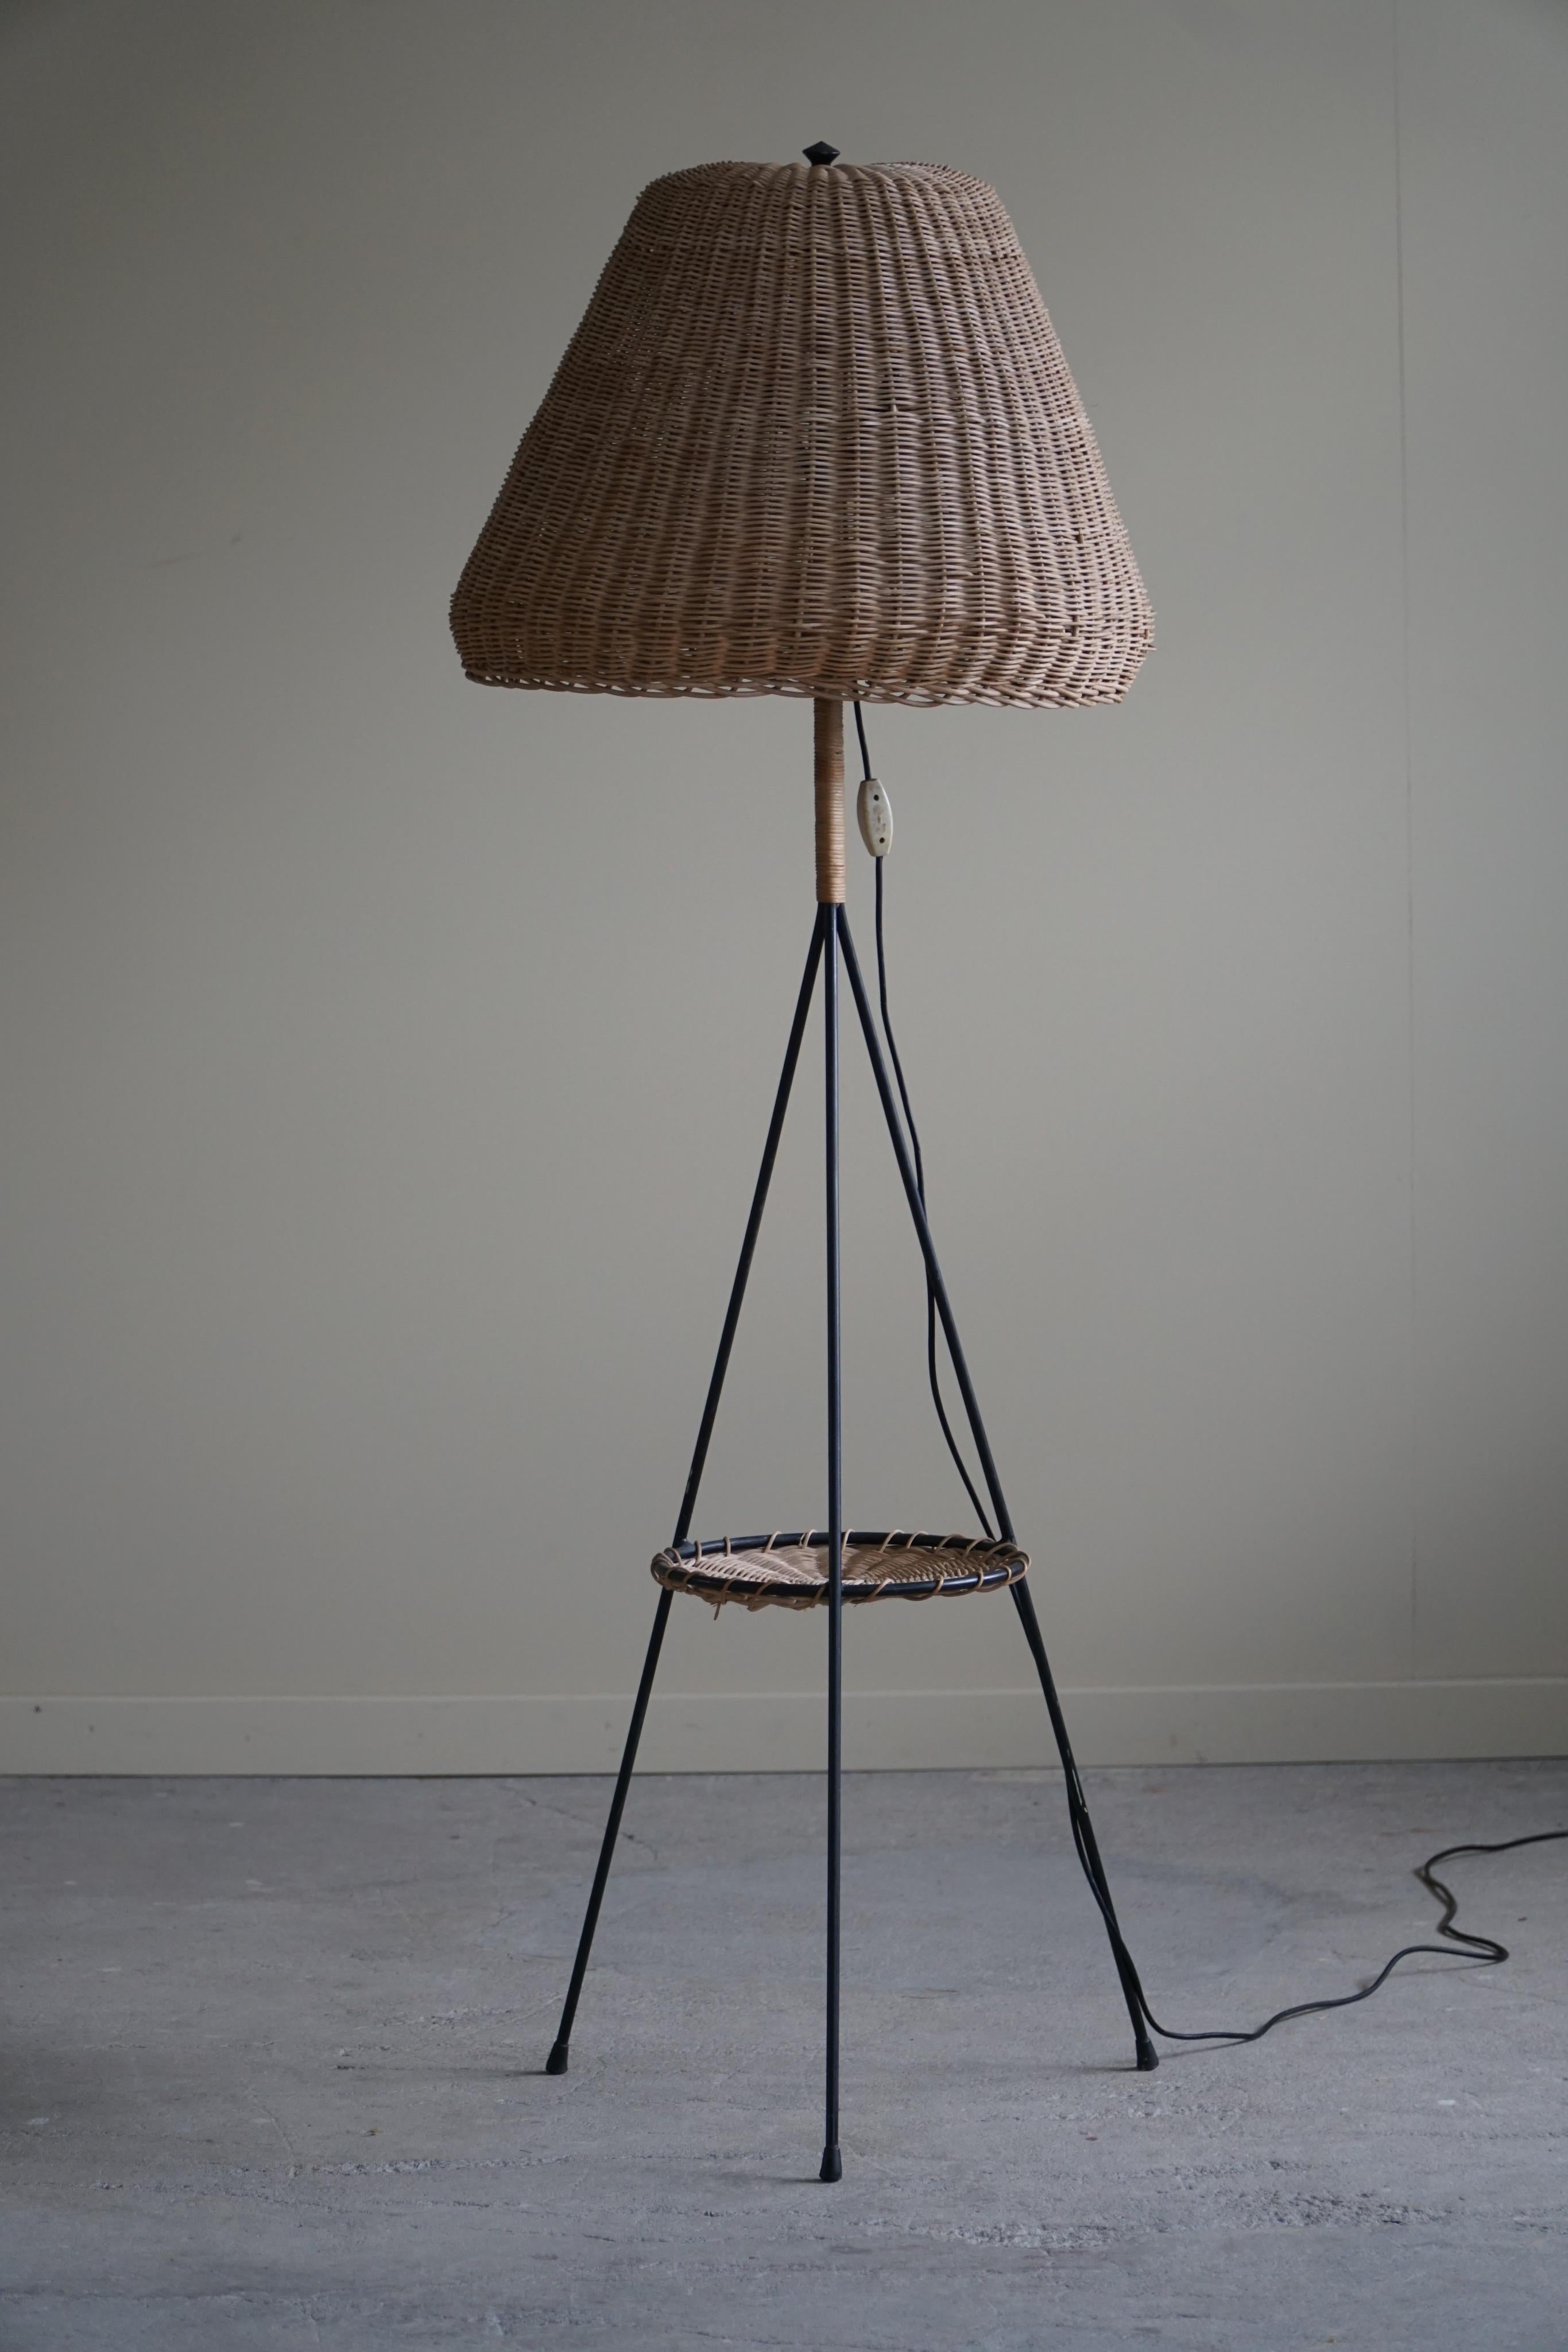 French Modern, Floor Lamp in Rattan and Steel, Mid Century, 1960s For Sale 3